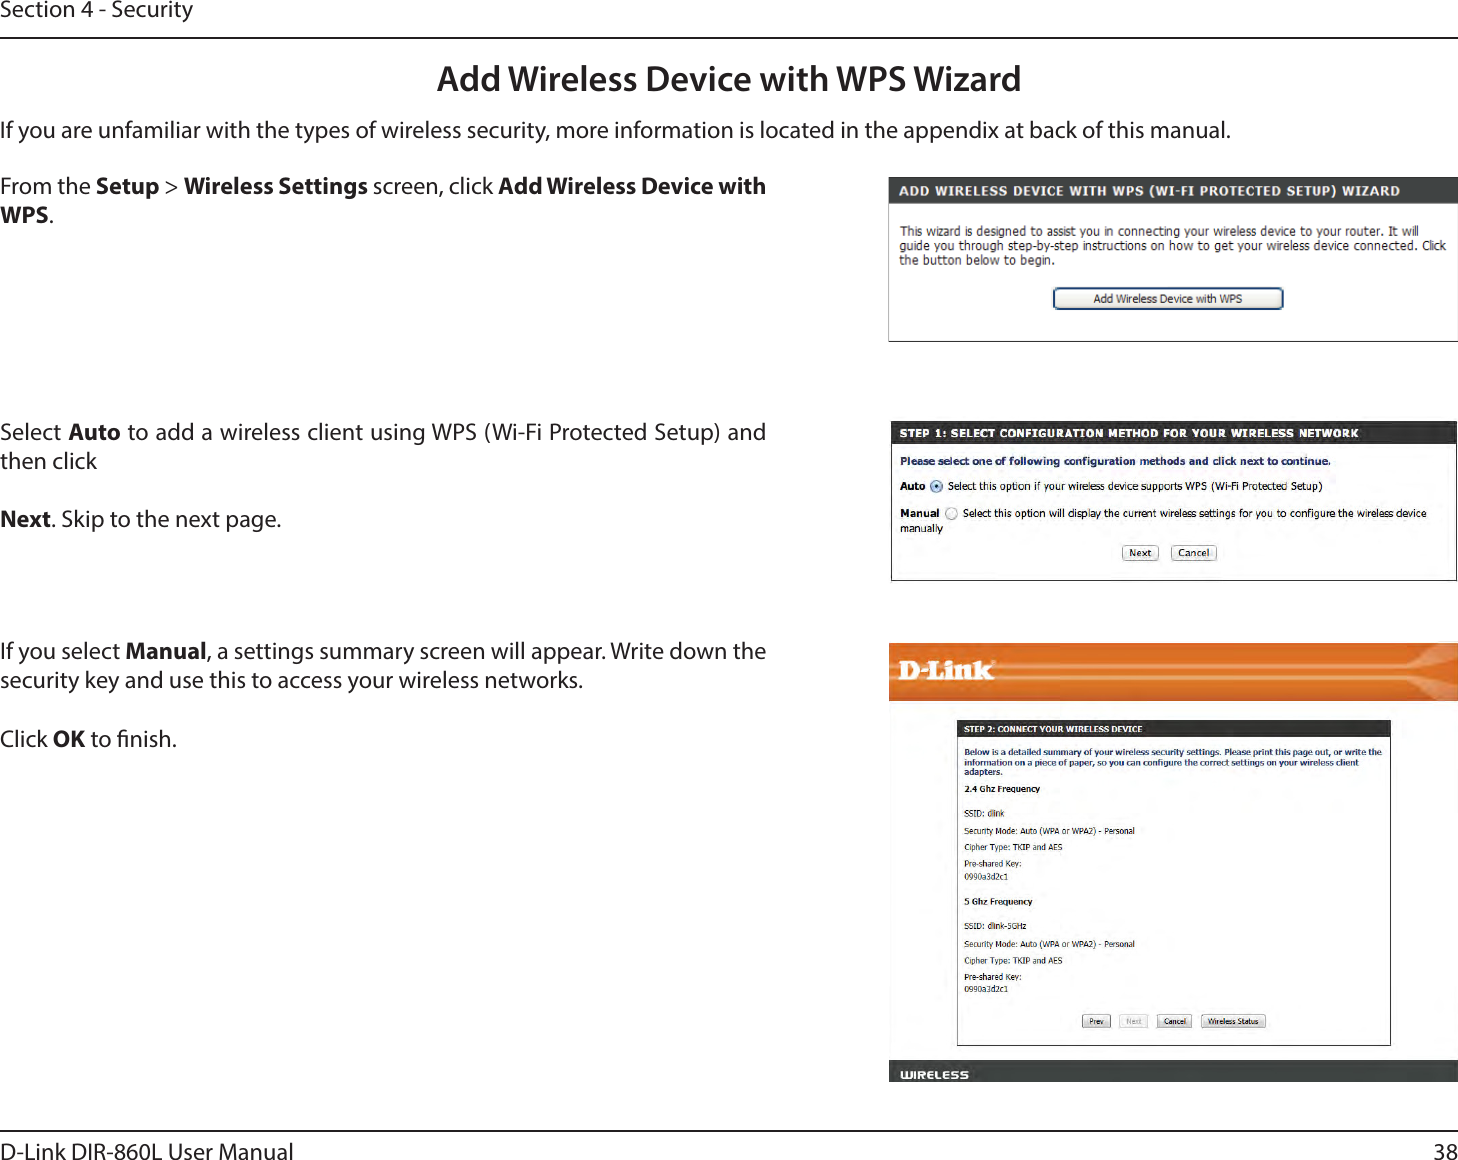 38D-Link DIR-860L User ManualSection 4 - SecurityFrom the Setup &gt; Wireless Settings screen, click &quot;EE8JSFMFTT%FWJDFXJUIWPS.Add Wireless Device with WPS WizardIf you select Manual, a settings summary screen will appear. Write down the security key and use this to access your wireless networks.Click OK to nish.Select &quot;VUP to add a wireless client using WPS (Wi-Fi Protected Setup) and then click Next. Skip to the next page. If you are unfamiliar with the types of wireless security, more information is located in the appendix at back of this manual.